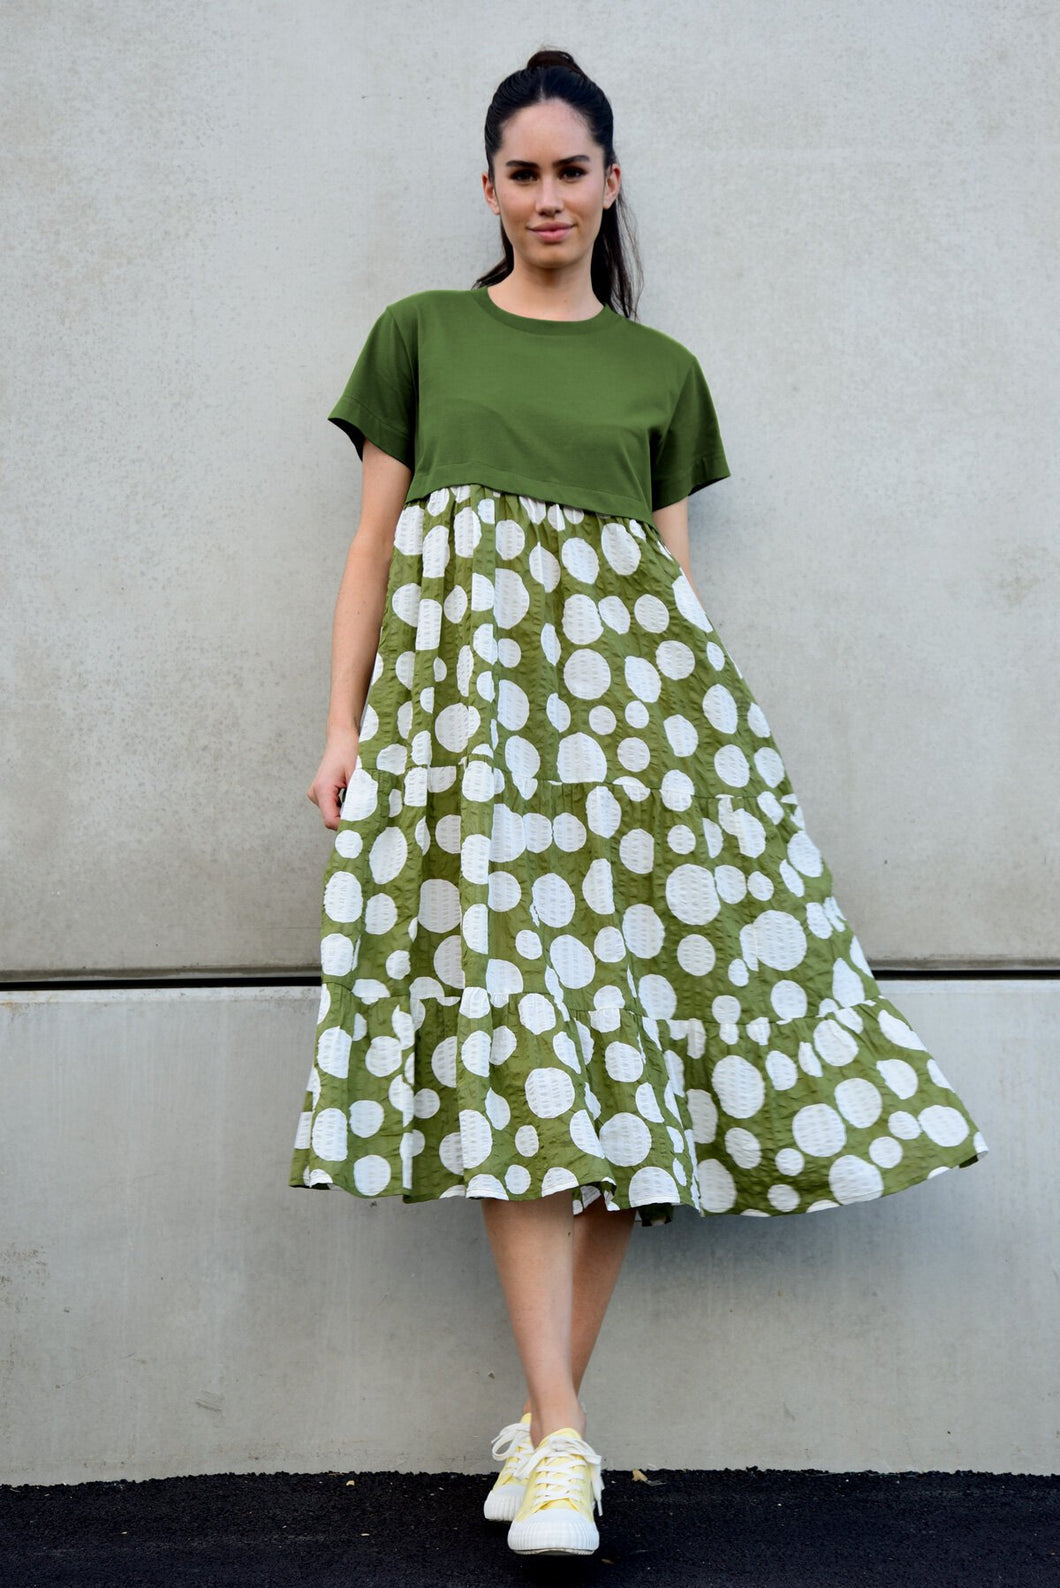 CURATE BY TRELISE COOPER TAKE A TWIRL DRESS